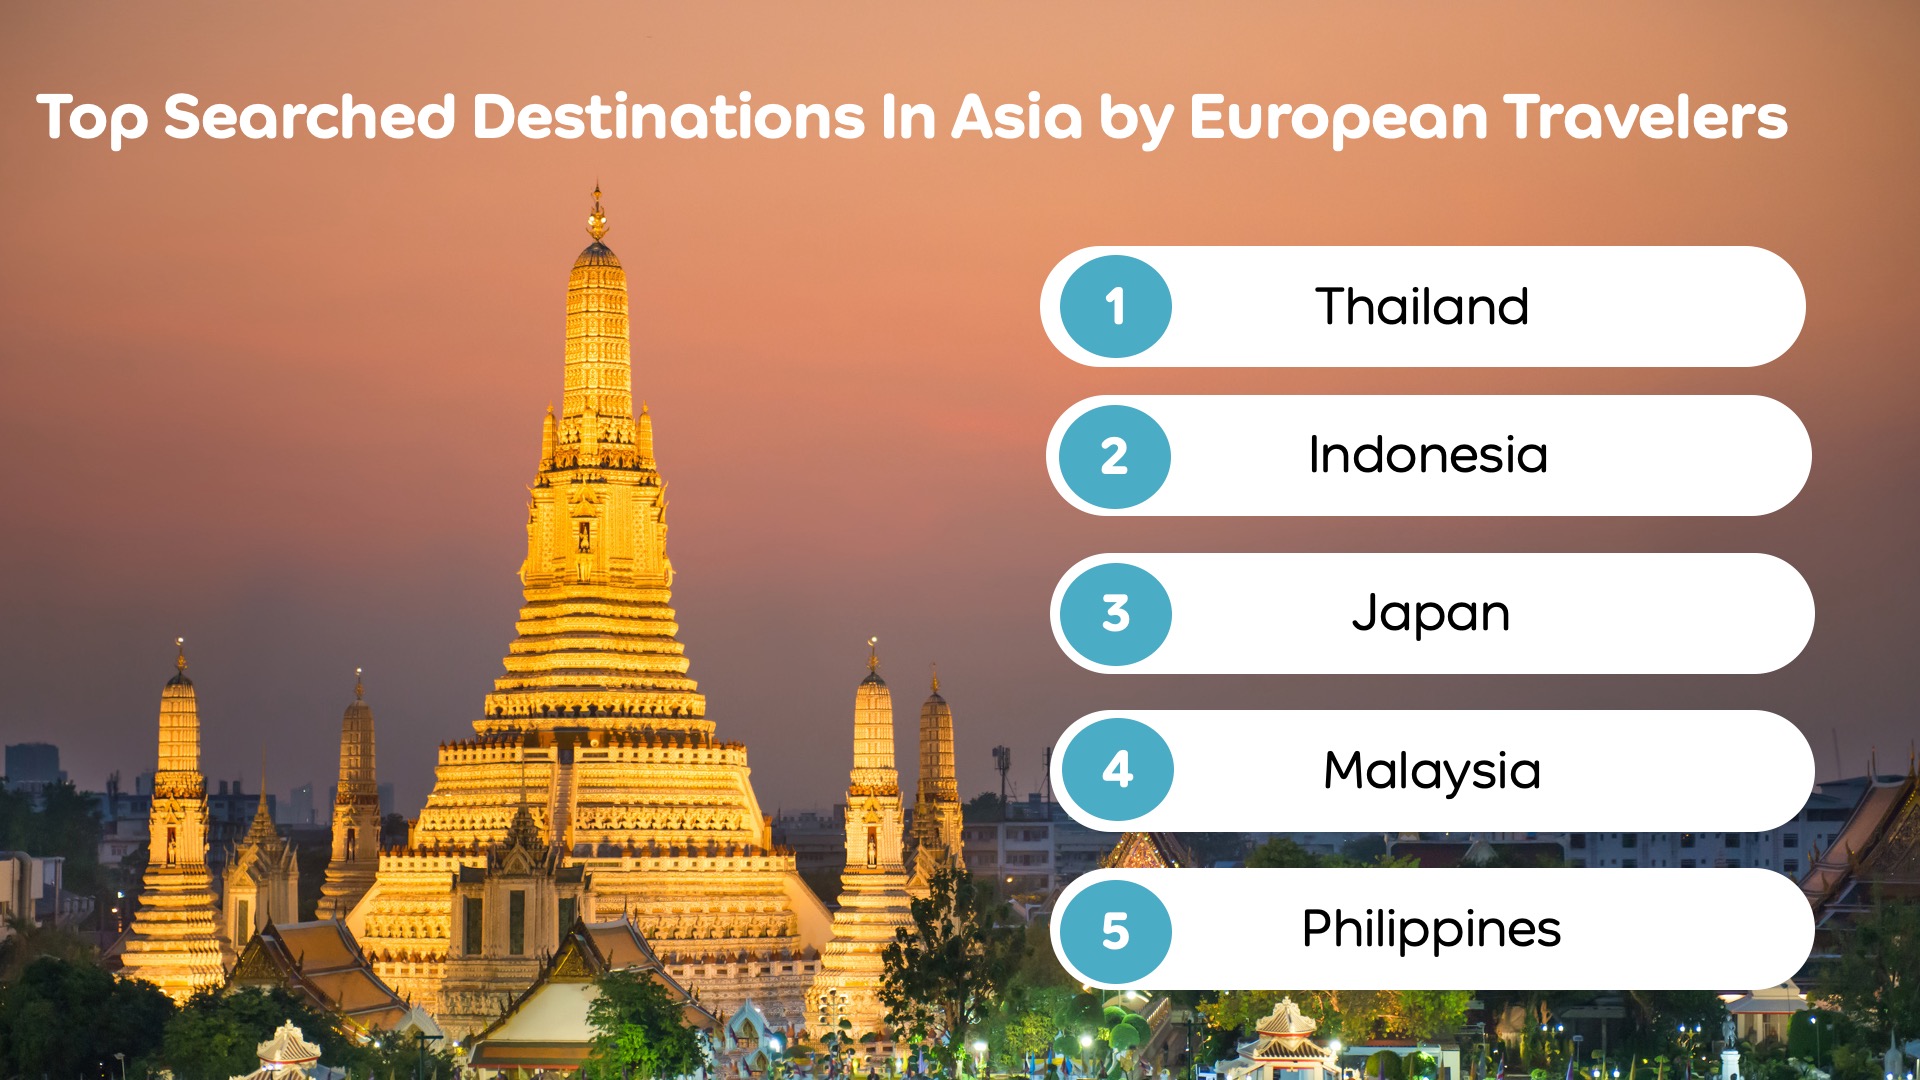 Agoda PH fifth most popular destination in Asia for European - Travel News, Insights & Resources.